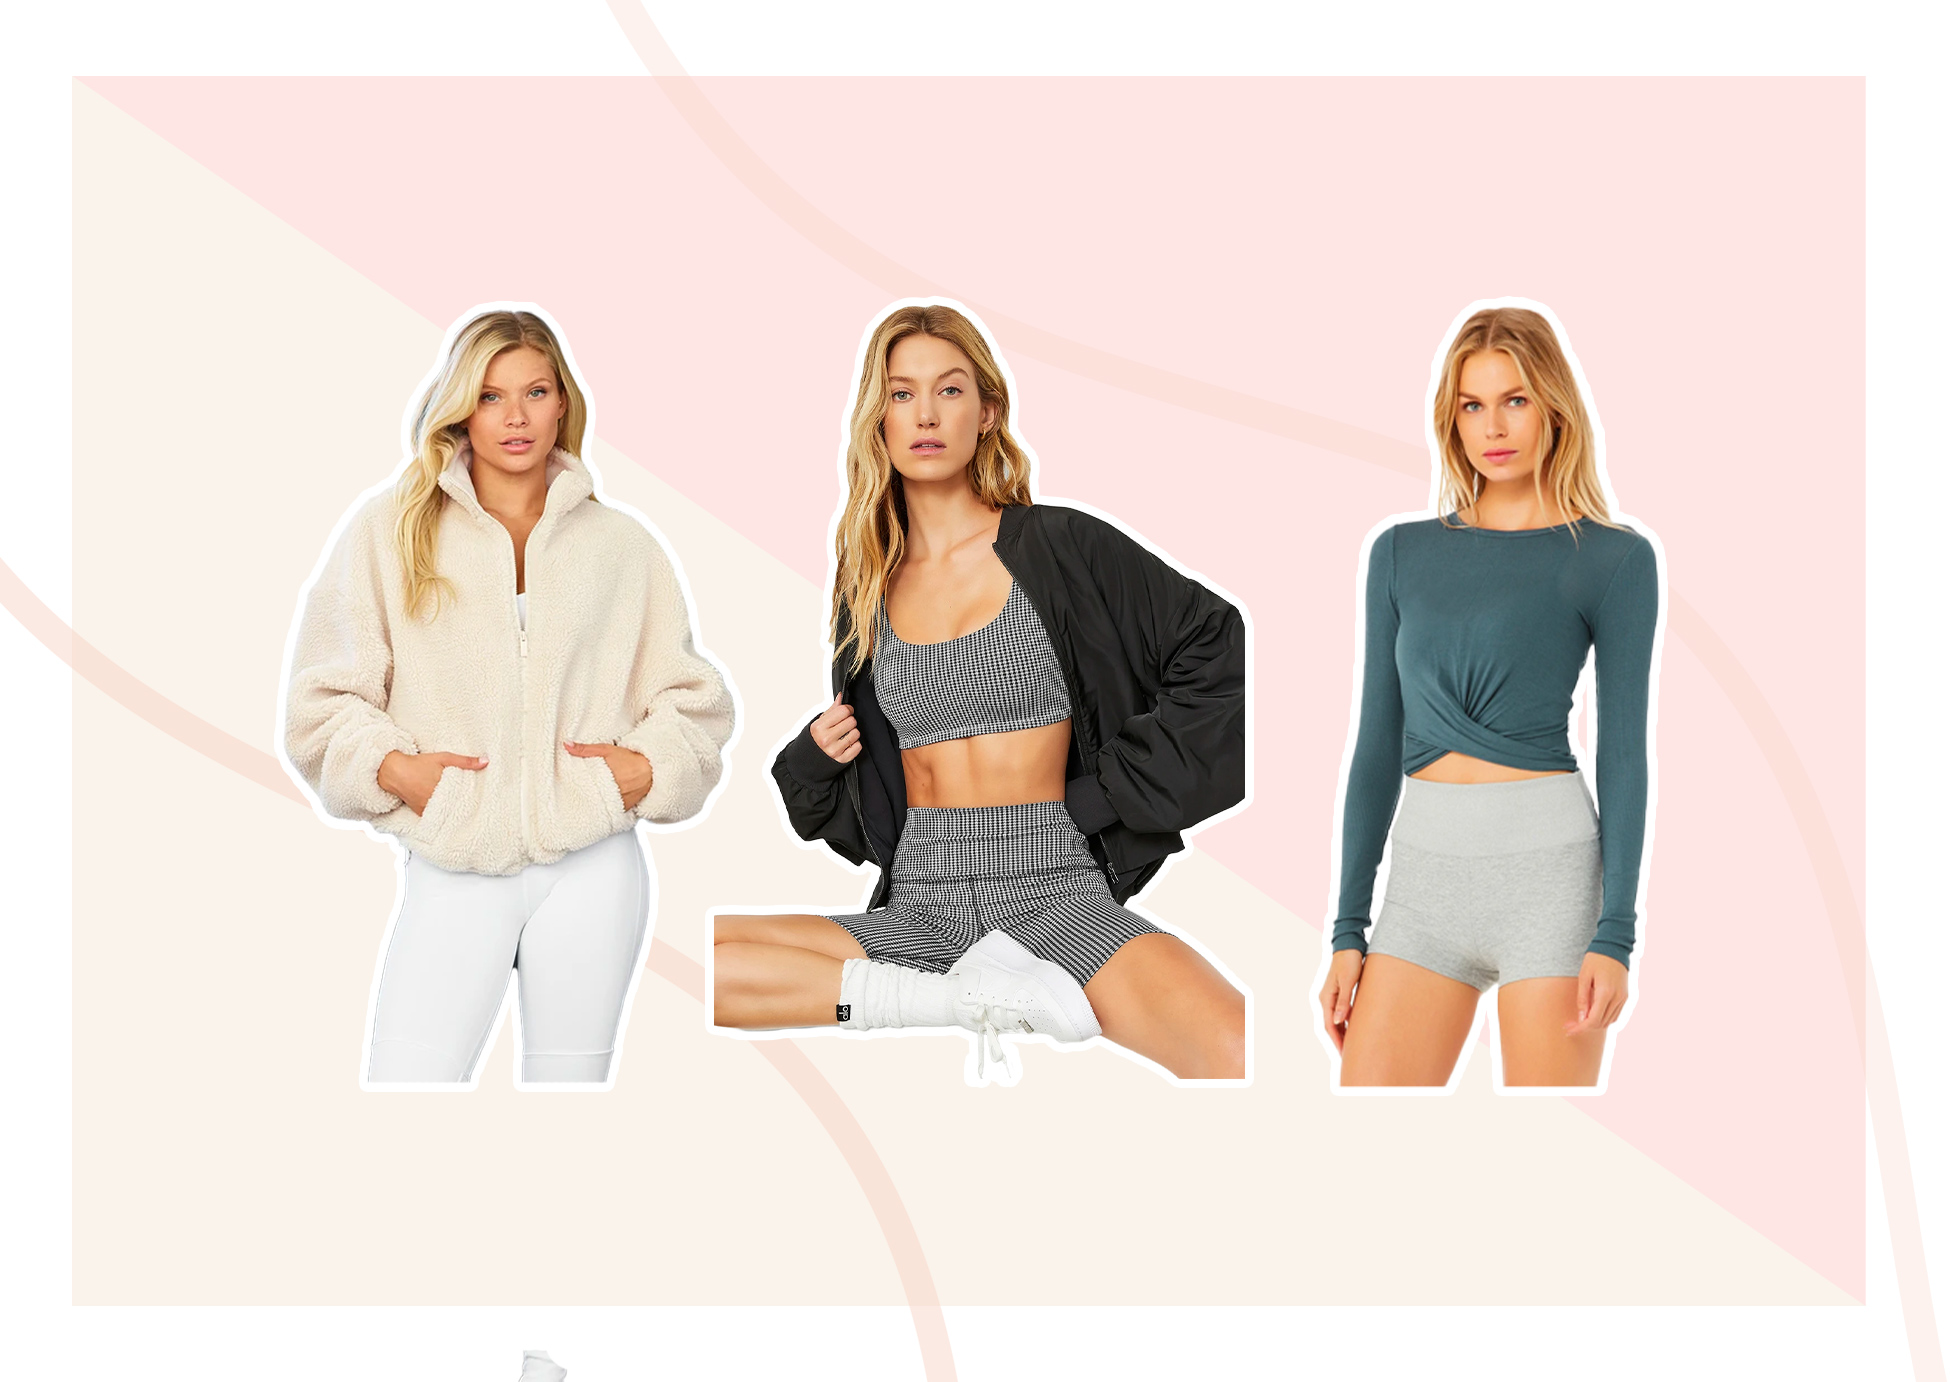 Activewear I’m Loving for Fall